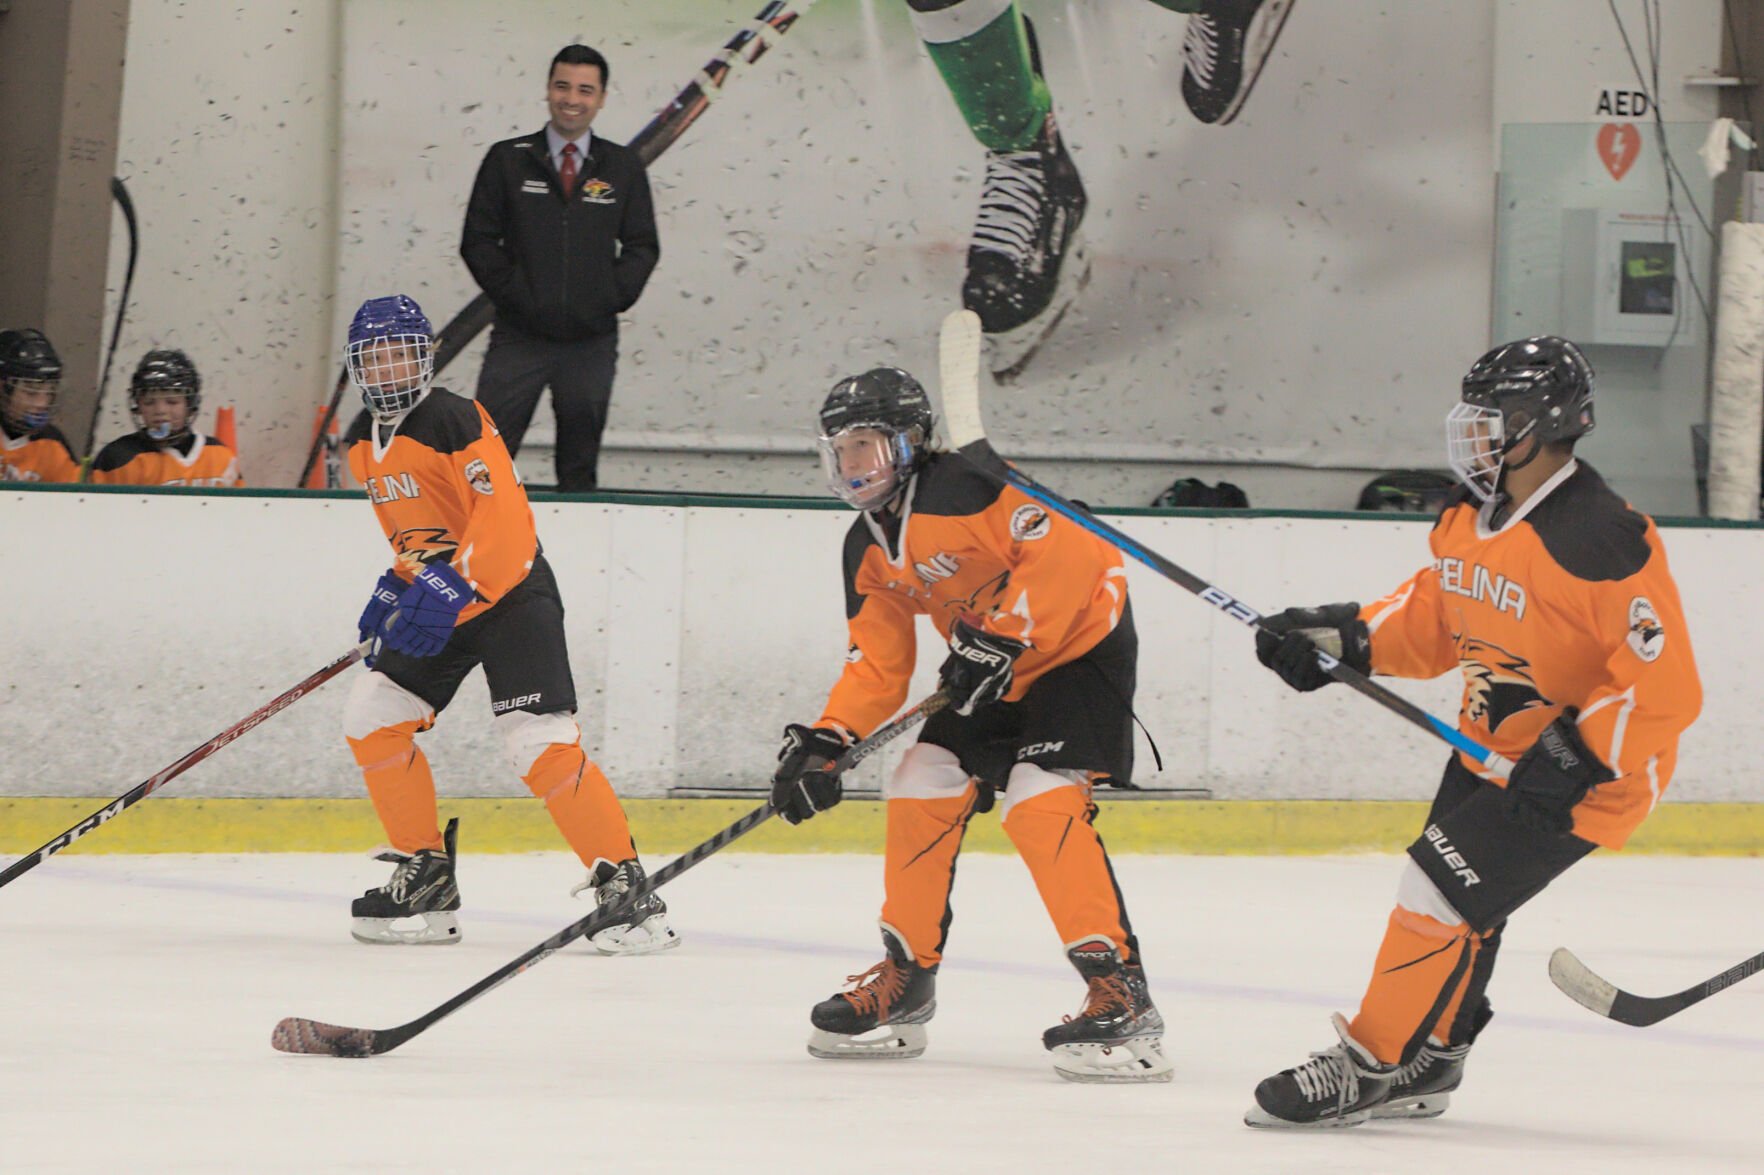 Hockey in Celina, Texas? You bet, as Celina Hockey Association looks ahead to growth after first season Celina Record starlocalmedia image picture